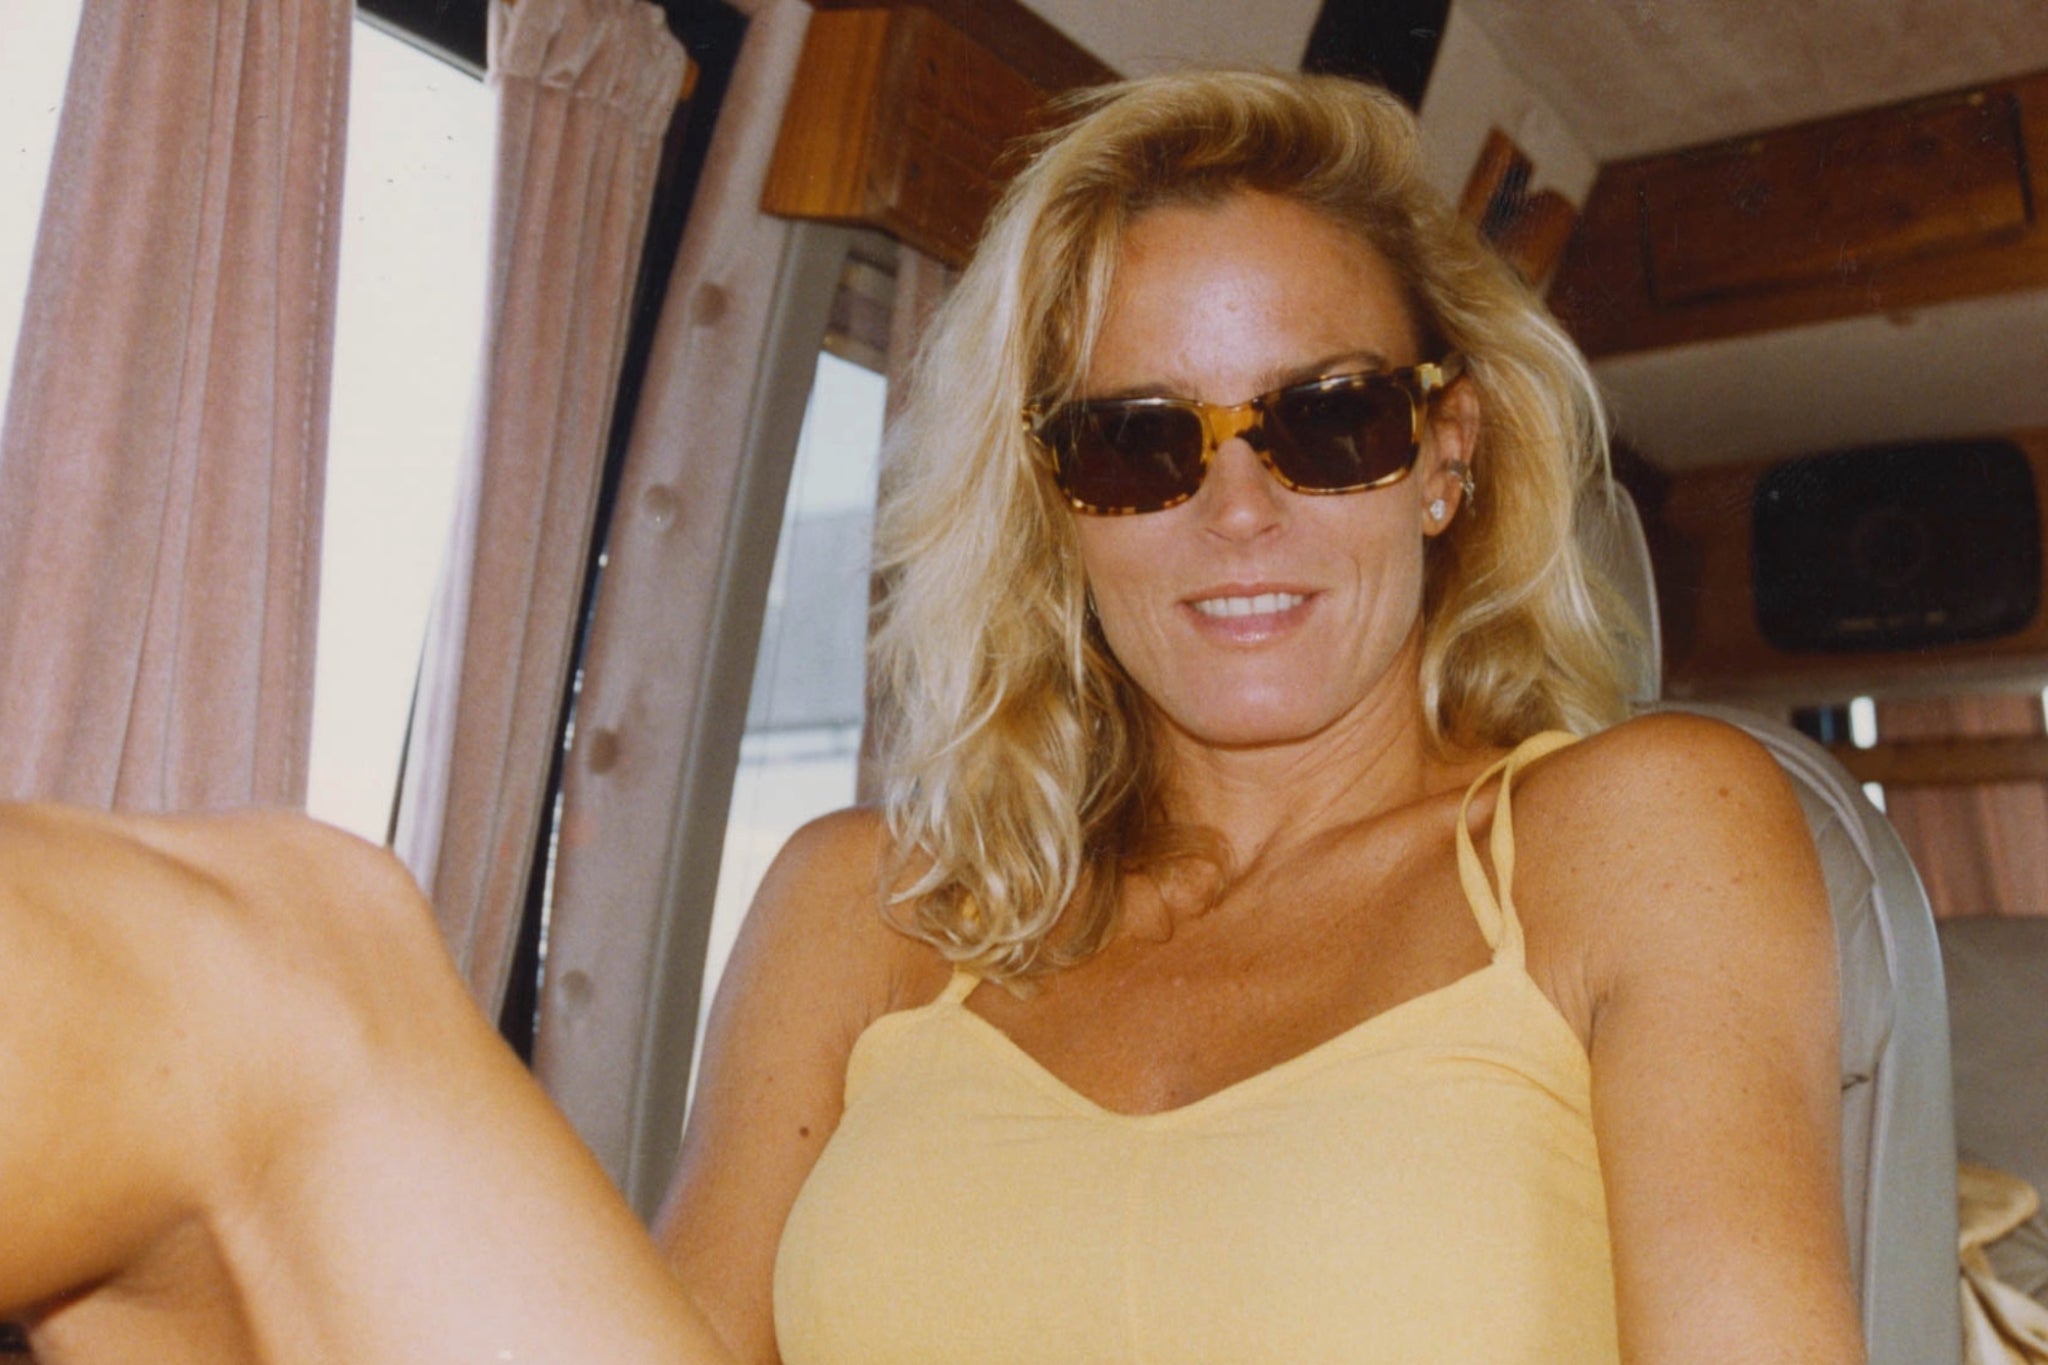 Nicole pictured on vacation in Cabo, Mexico in 1992